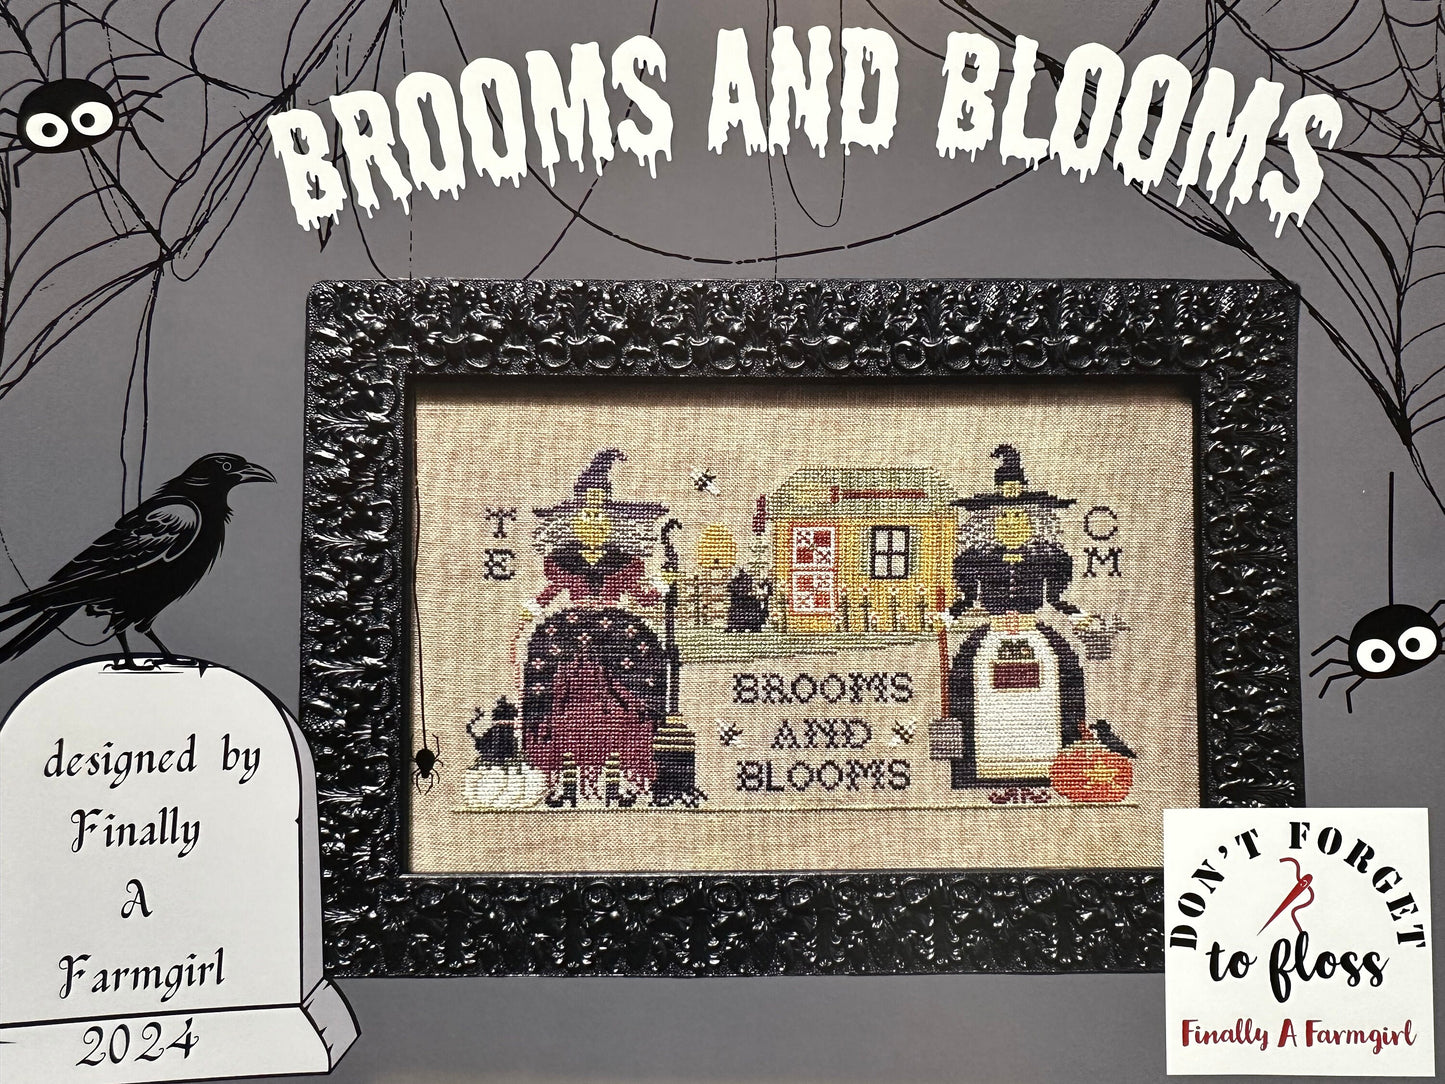 Brooms and Blooms by Finally a Farm Girl